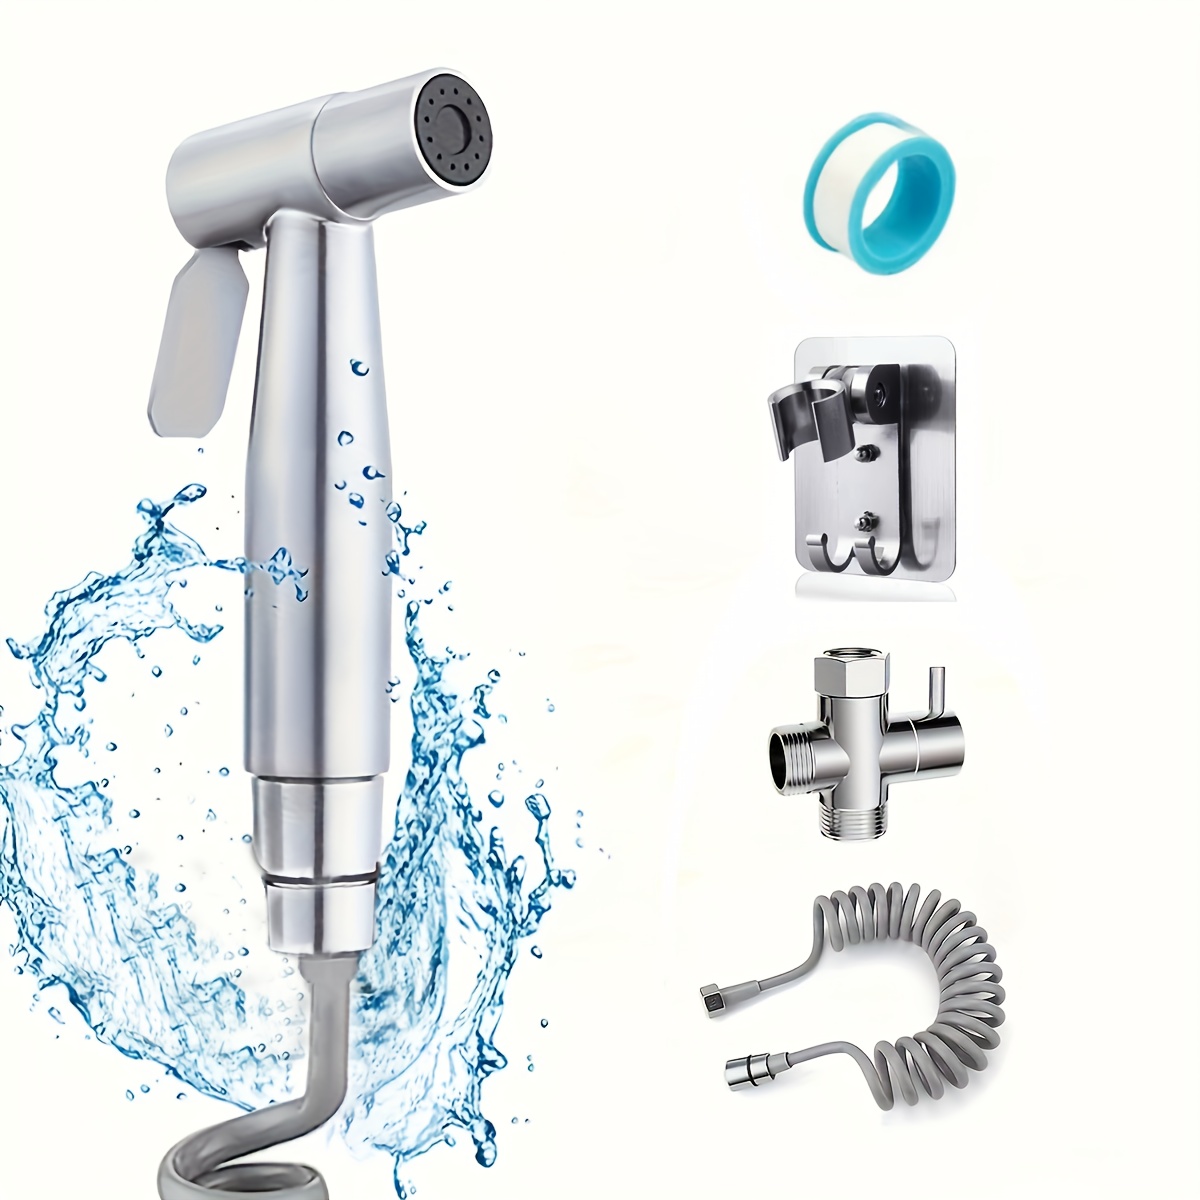 

Stainless Steel Toilet Bidet Sprayer Set With Handheld Nozzle, T-adapter, Hose, And Wall Mount Bracket For Personal Hygiene And Laundry Washing